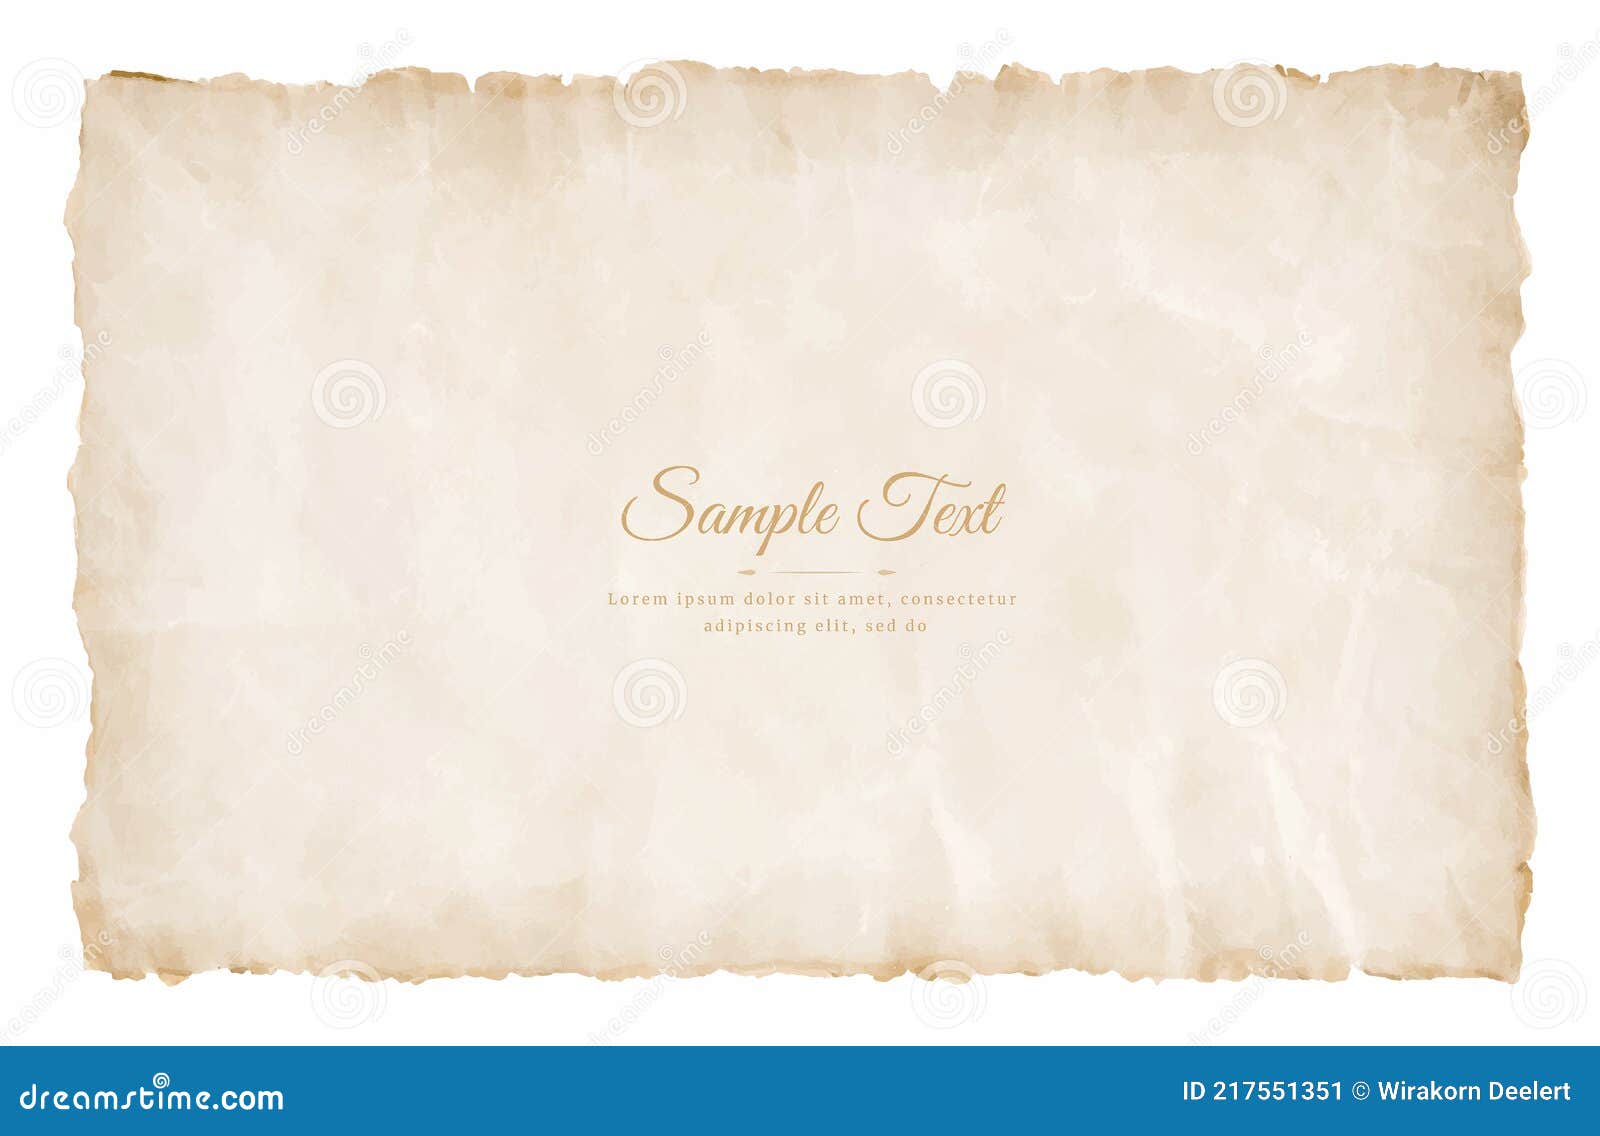 https://thumbs.dreamstime.com/z/old-parchment-paper-sheet-vintage-aged-texture-isolated-white-background-217551351.jpg